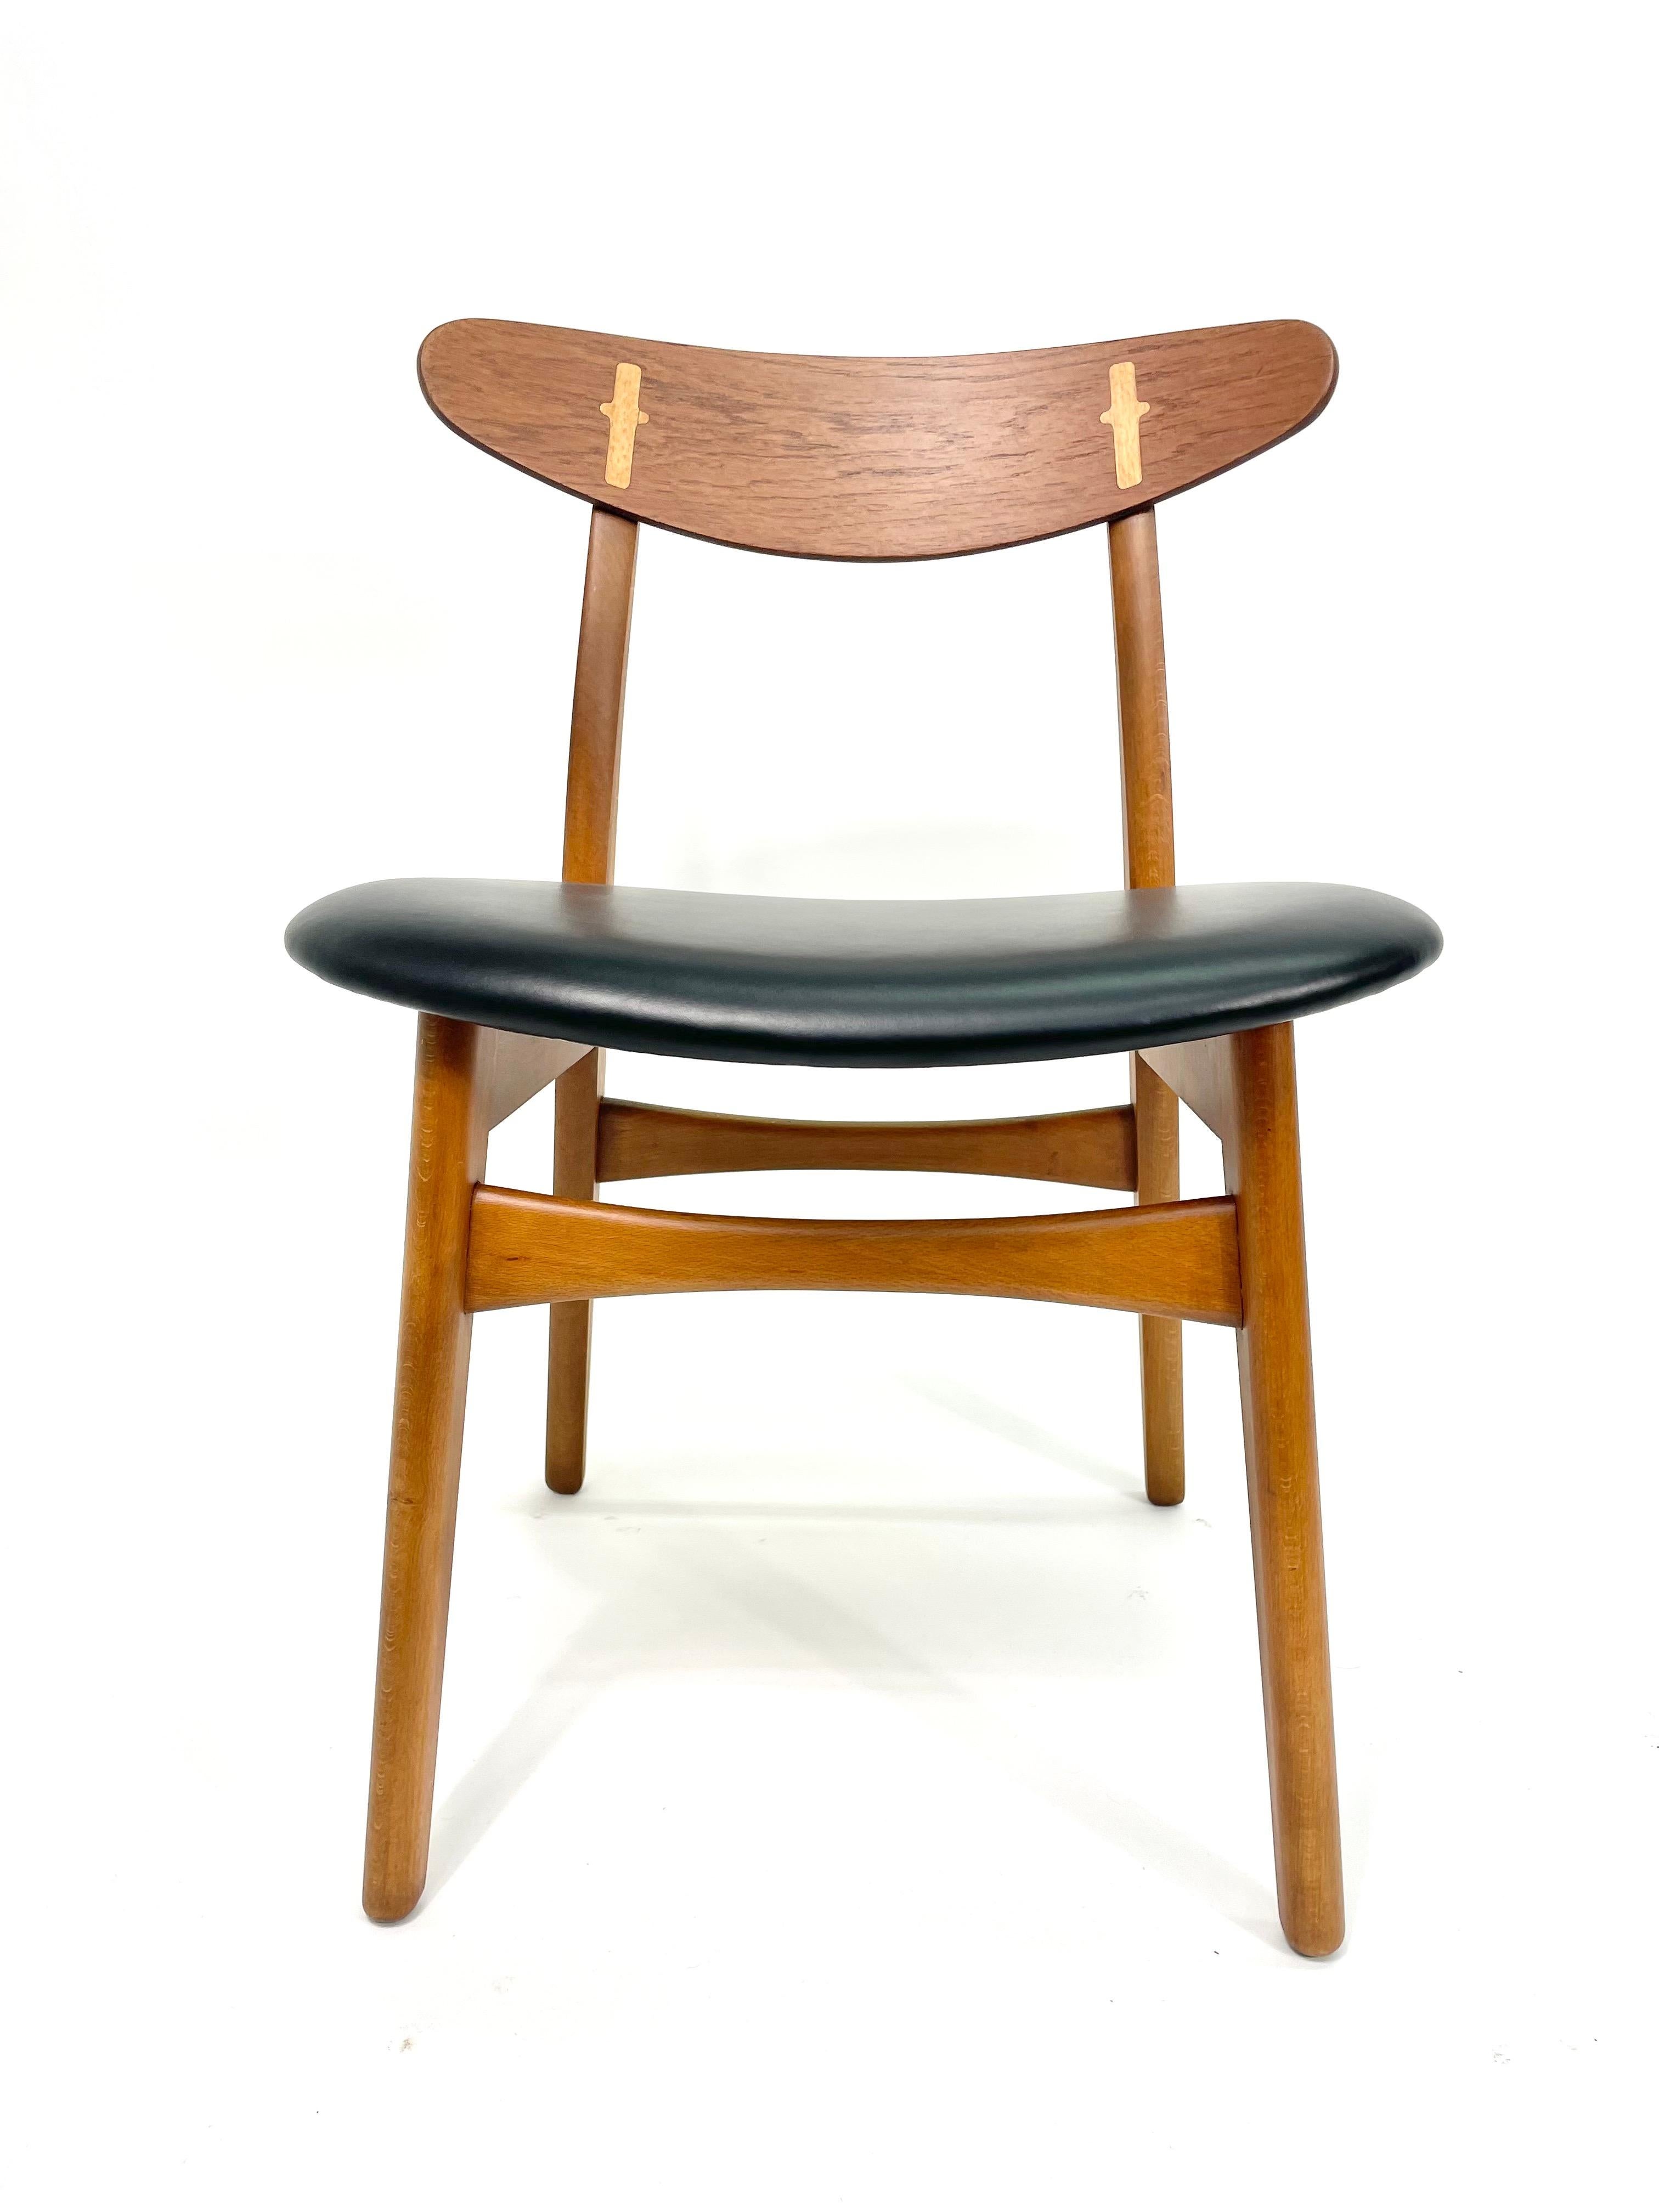 This is a stunning set of 6 dining chairs model CH30 designed by Hans J. Wegner and manufactured by Carl Hansen & Son in Odense Denmark 1950.

These chairs are an early design by Wegner and were first introduced in 1950. These chairs feature